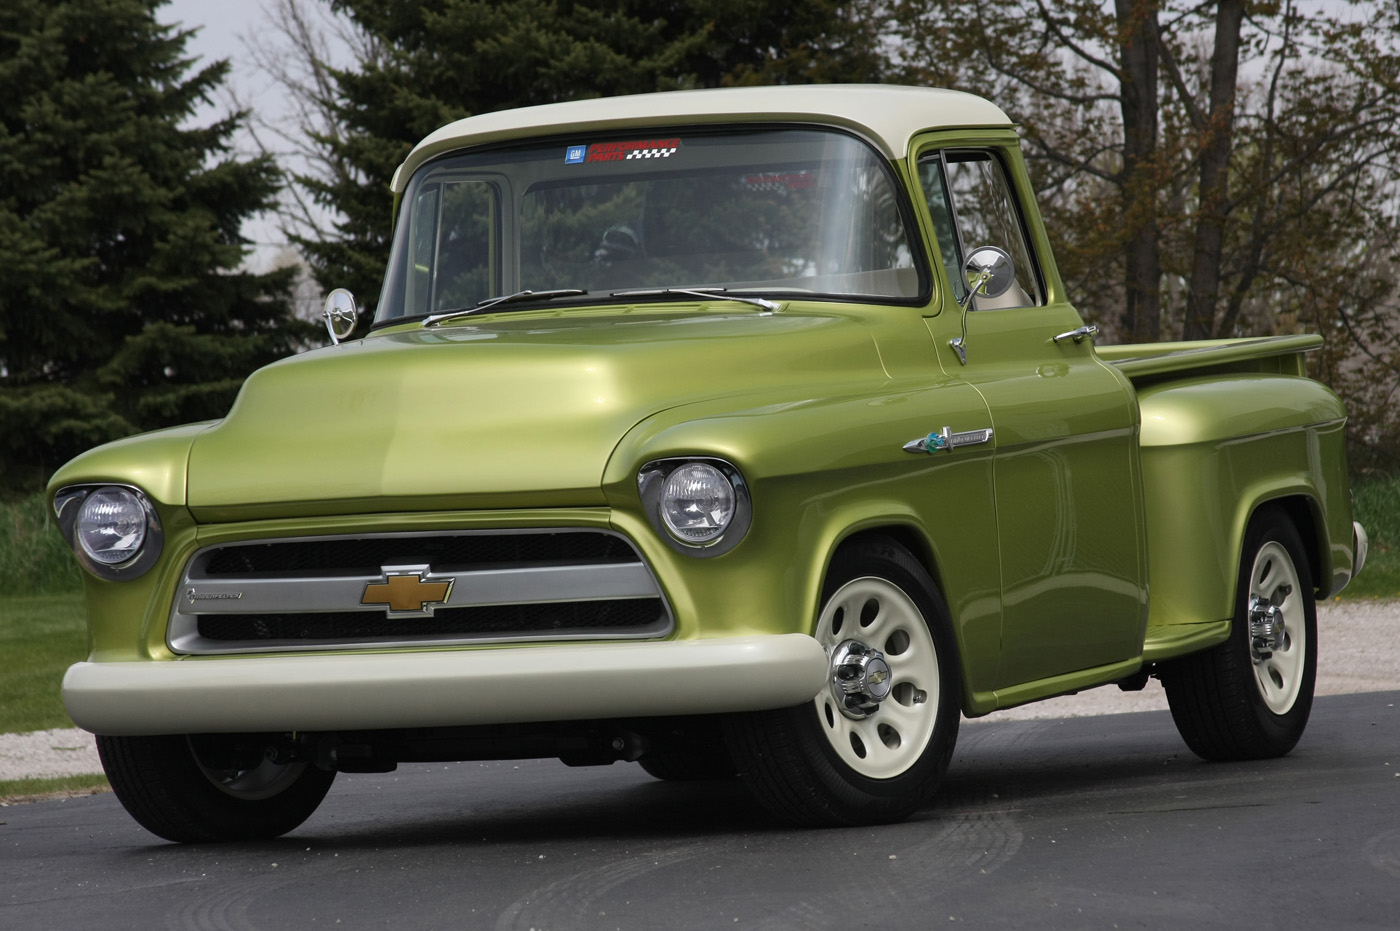 1955 CHEVROLET E ROD PICKUP Wallpaper and Background Image 1400x931